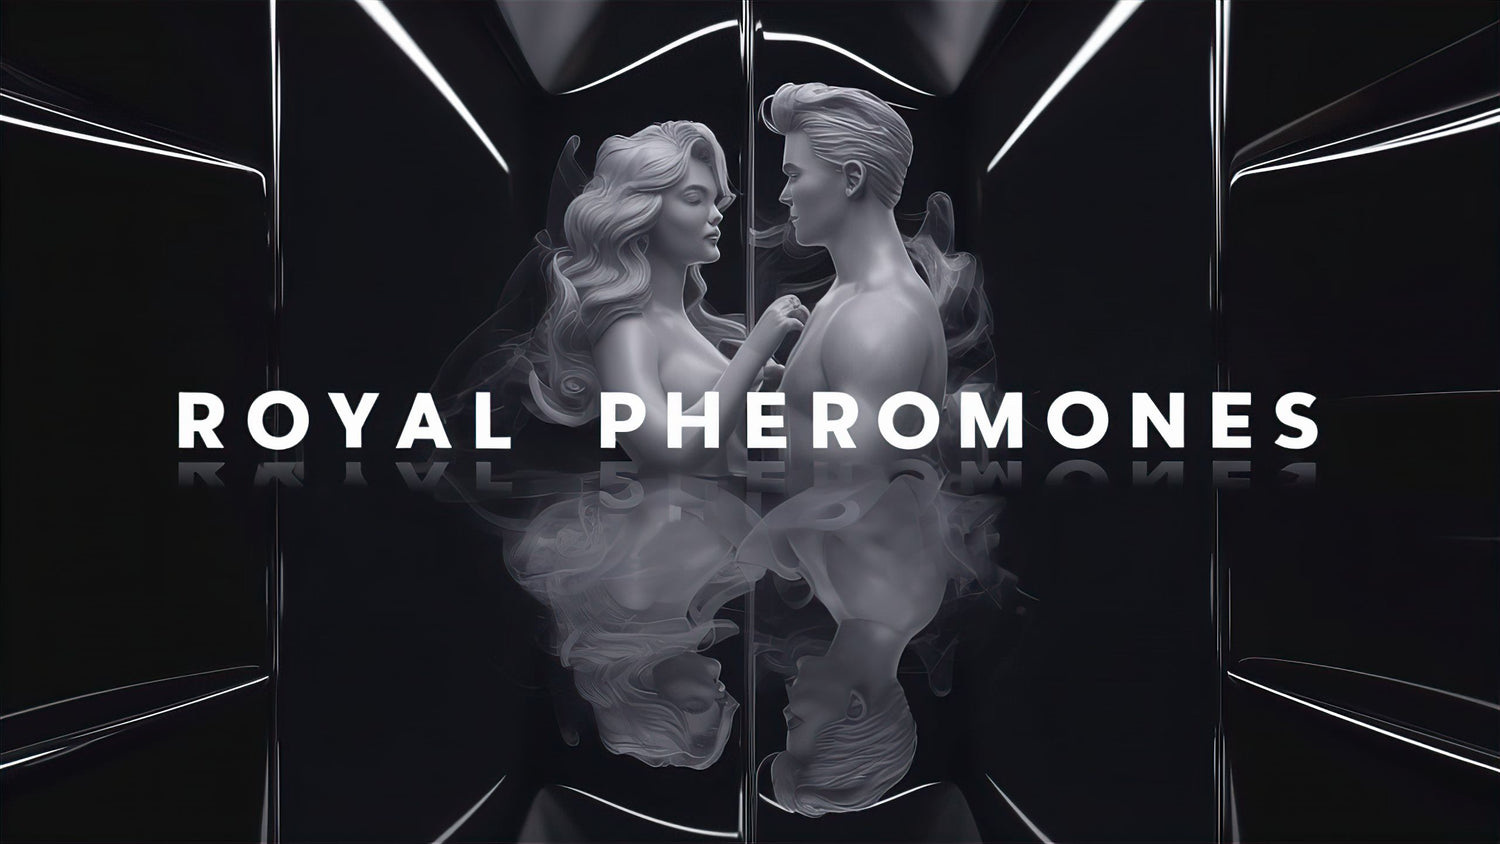 Hero Banner with the text "Royal Pheromones"